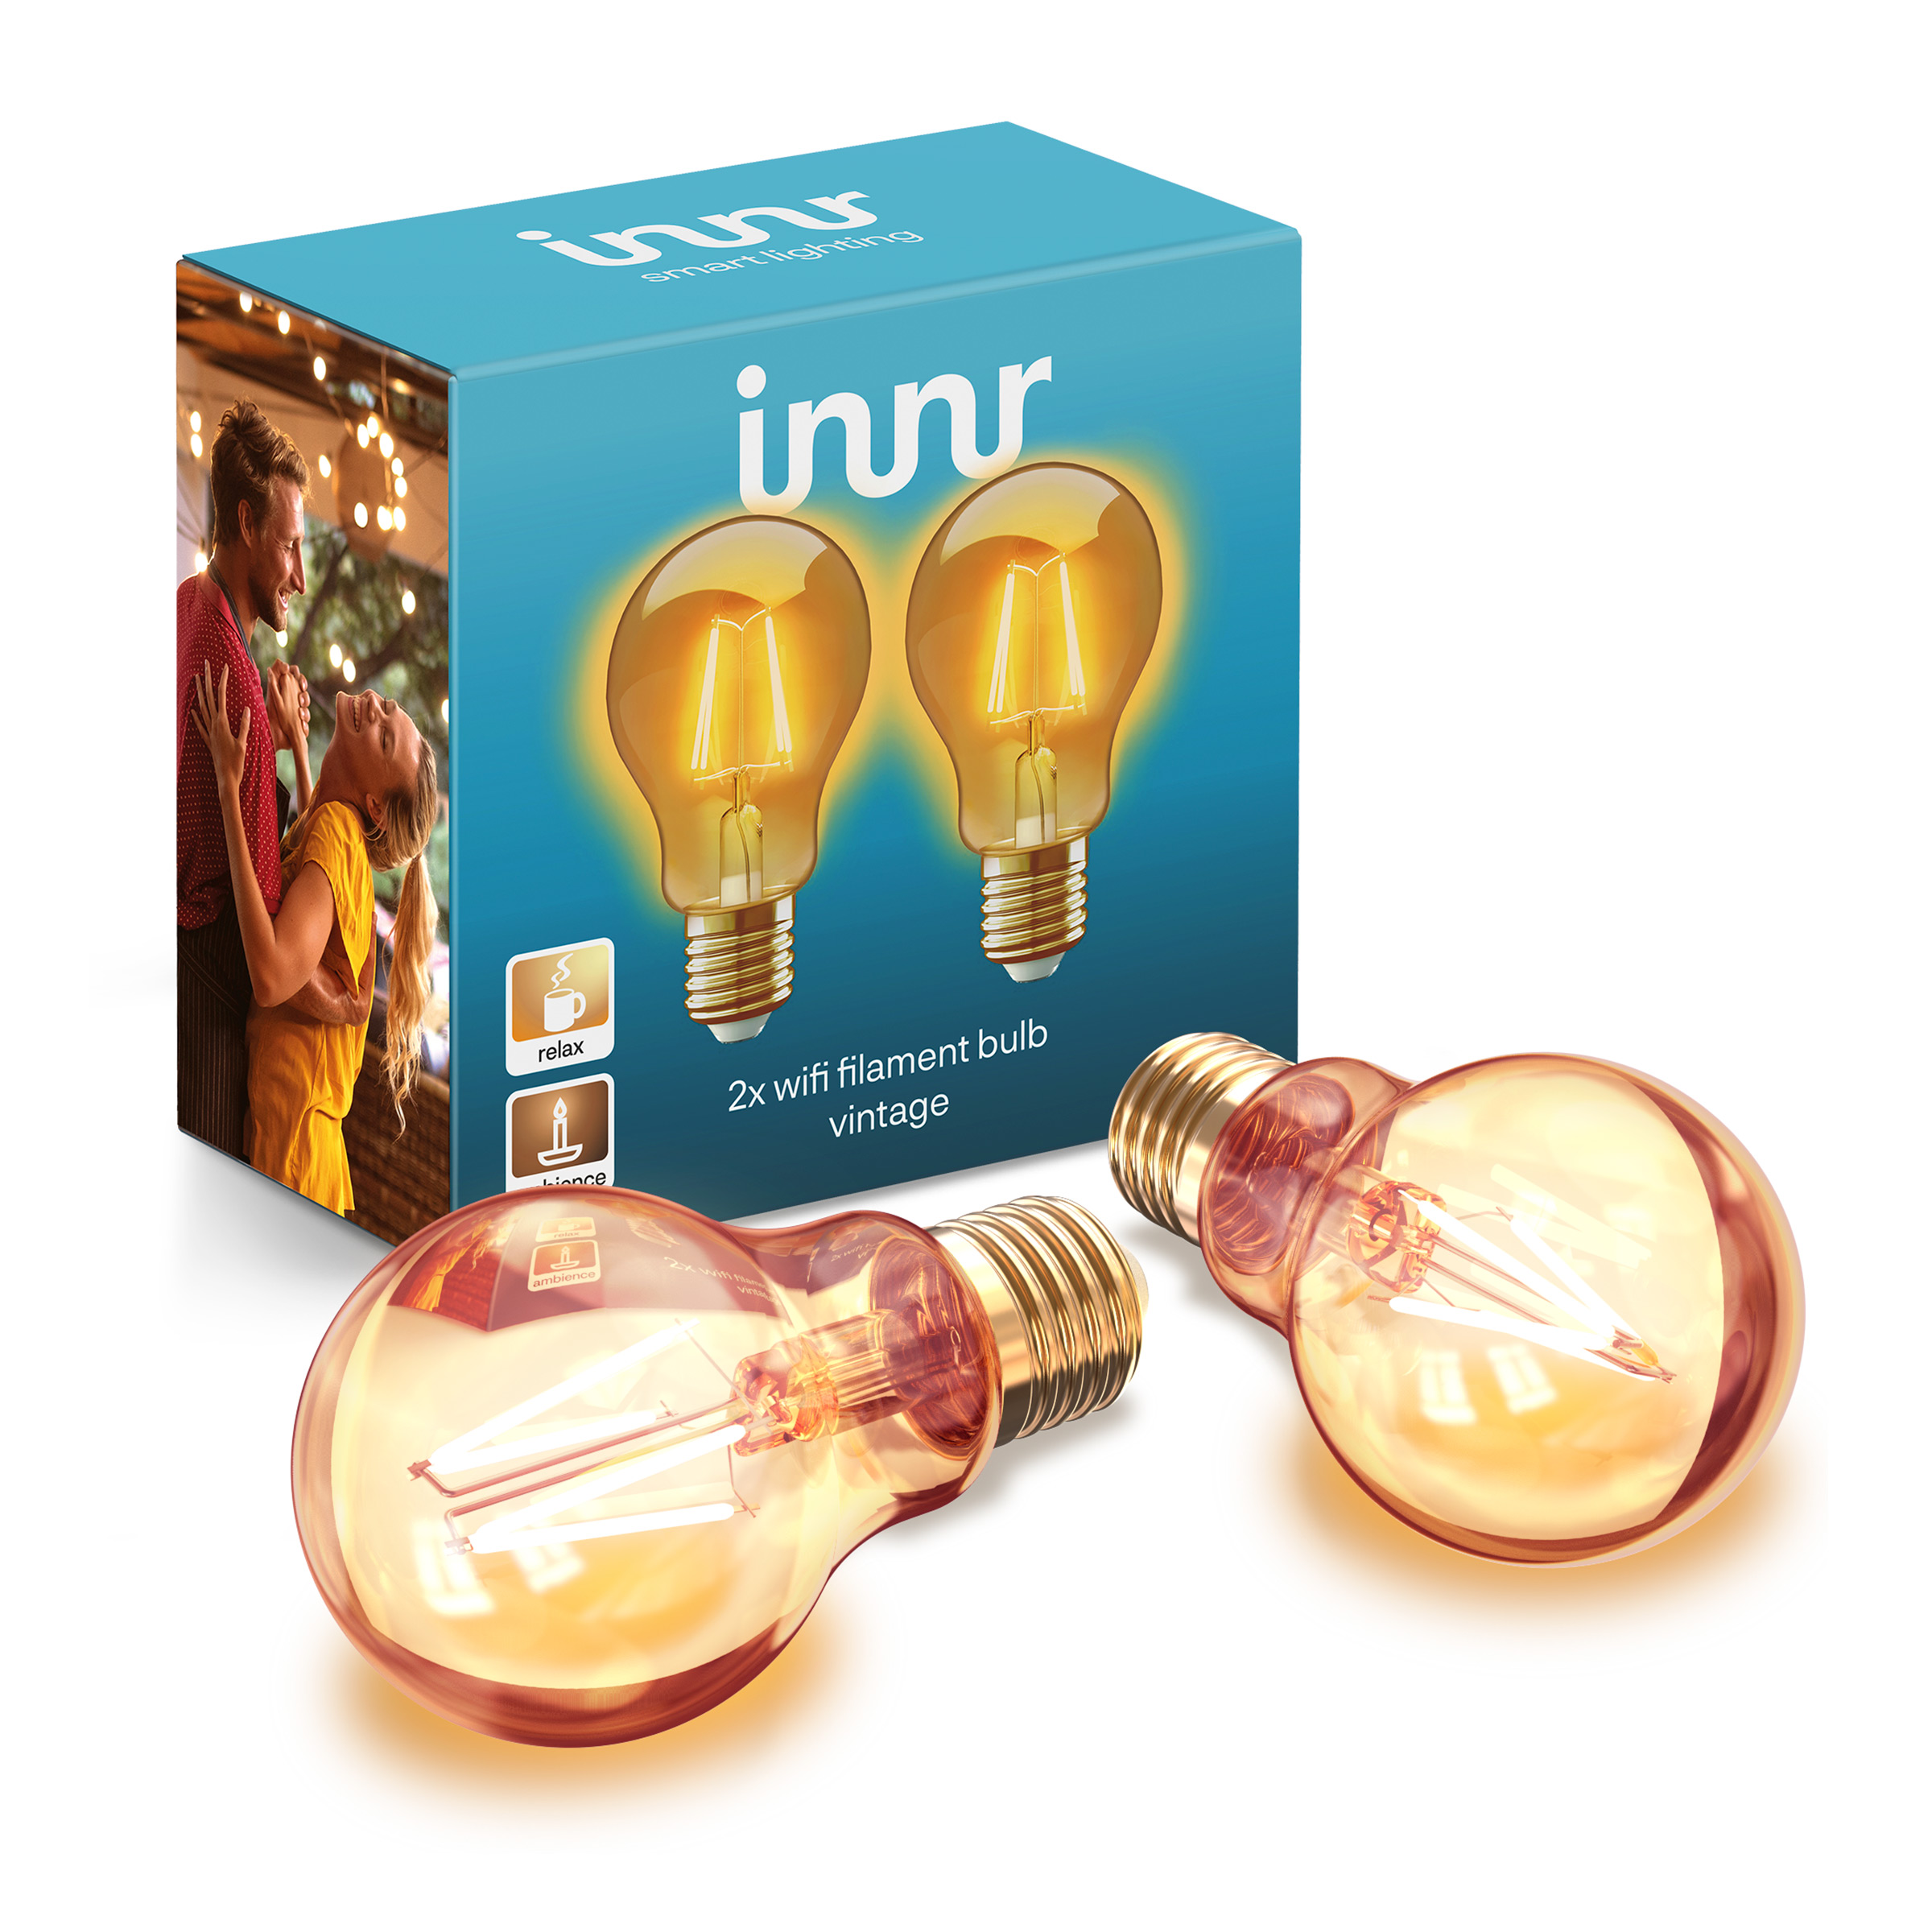 WRF 763 2 WiFi Filament bulb 2 pack composition